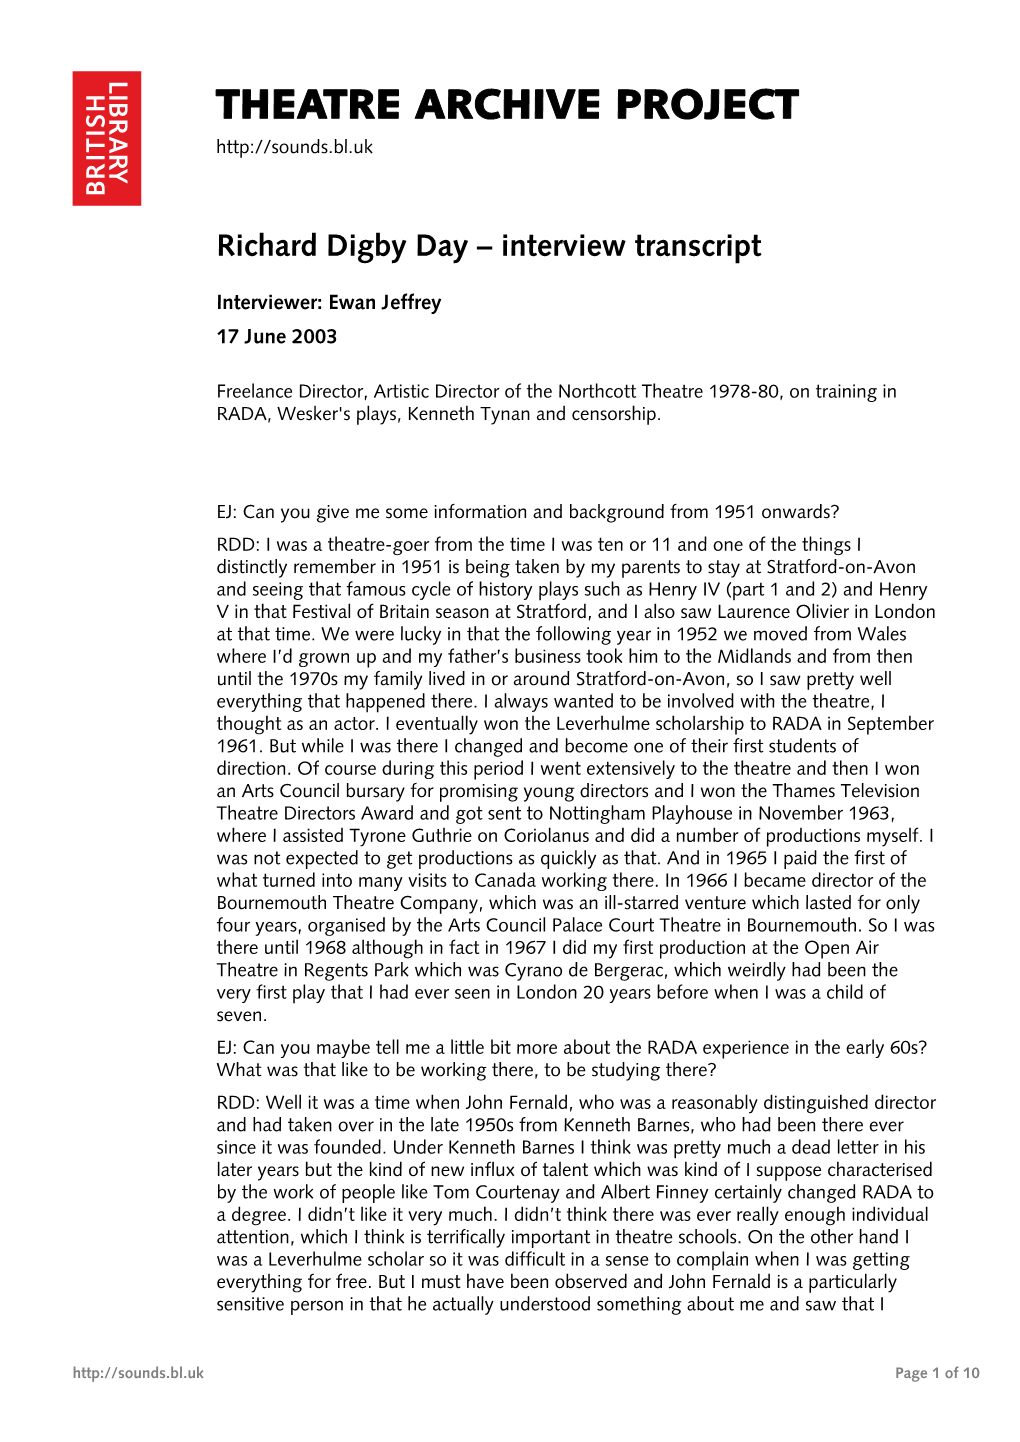 Theatre Archive Project: Interview with Richard Digby